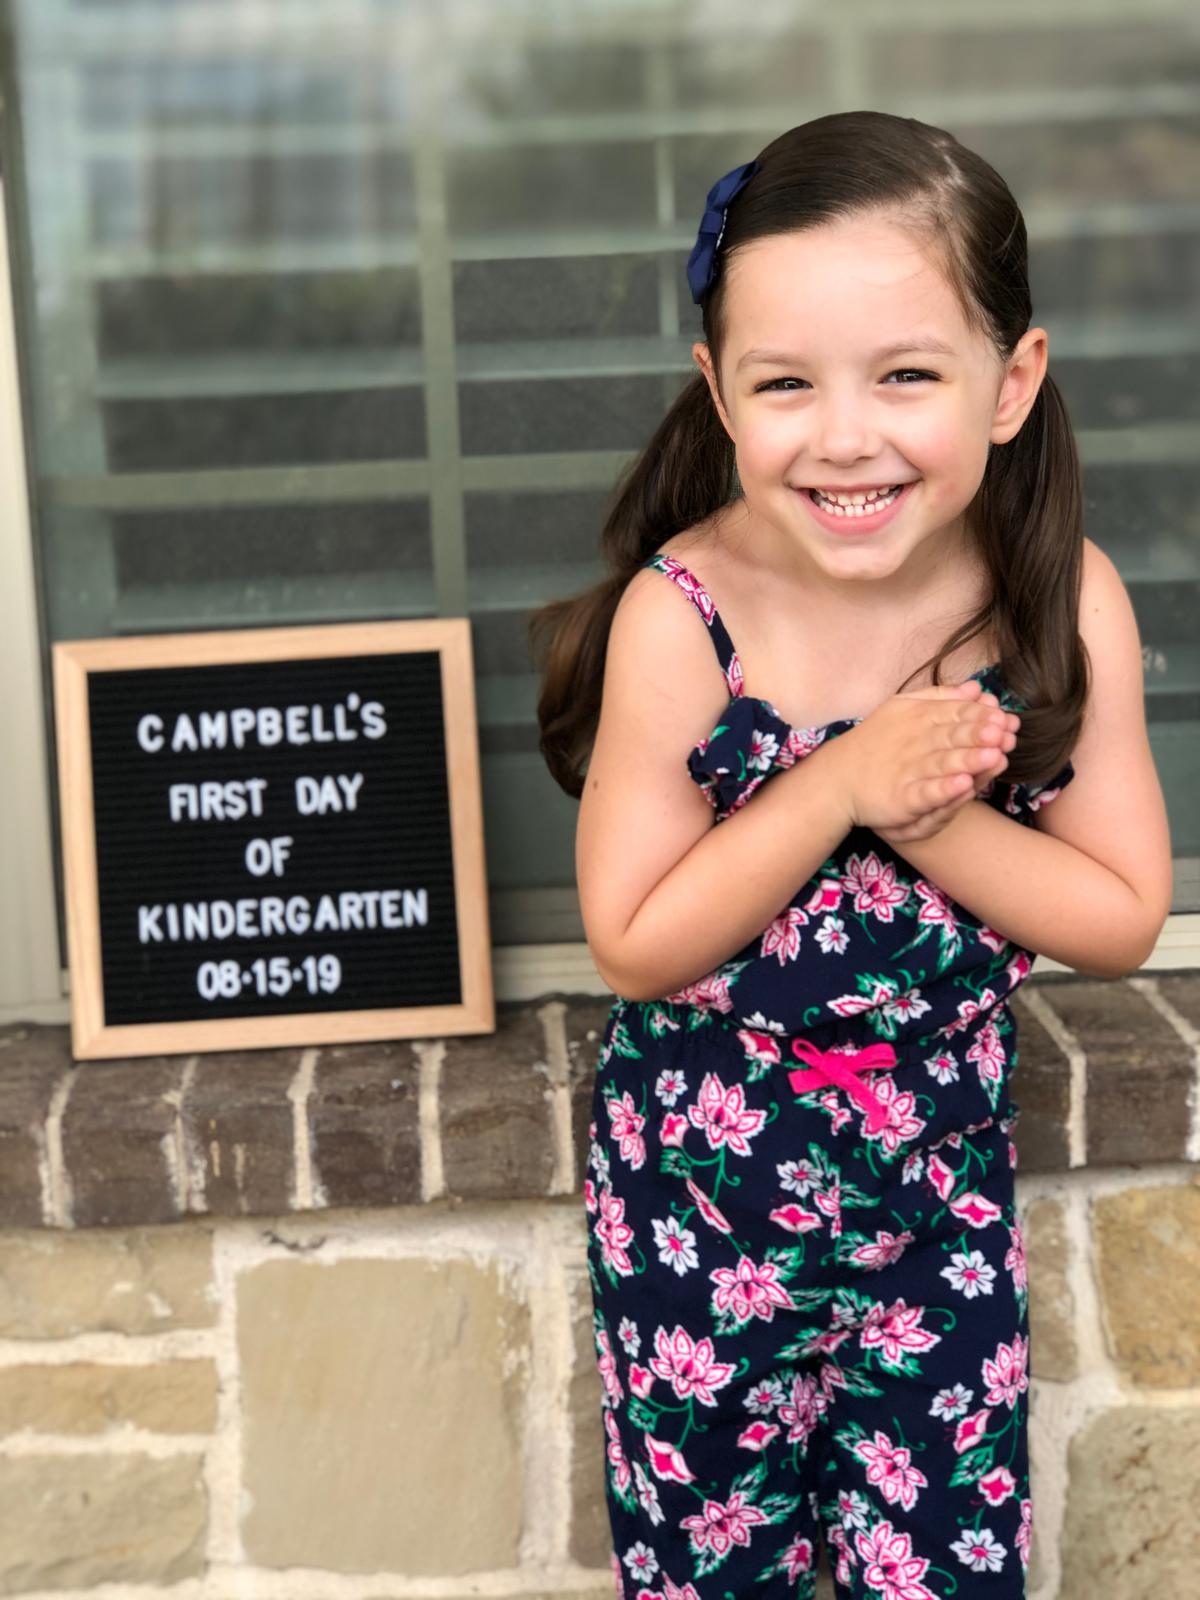 Campbell on her first day of kindergarten. (Photo courtesy of <a href="https://www.facebook.com/stephanie.moore.7146">Stephanie Hanrahan</a>)